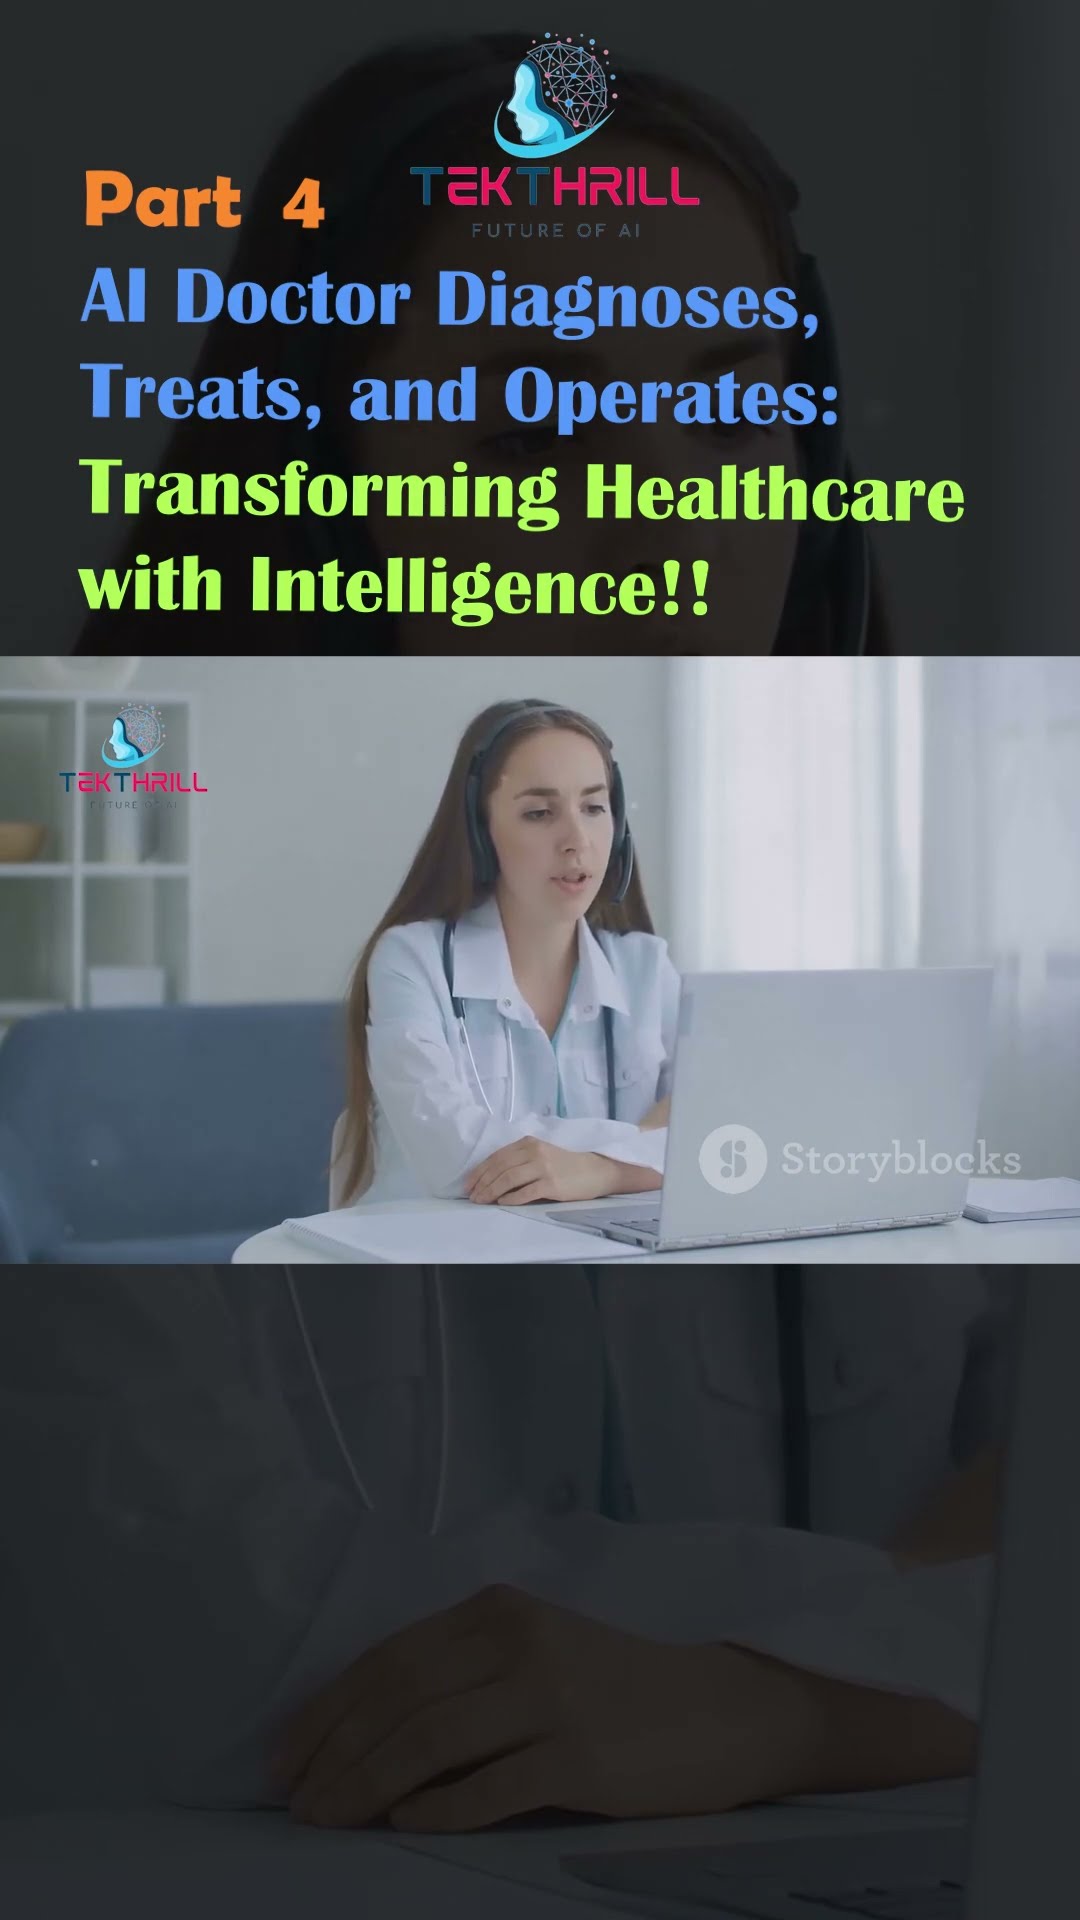 AI Doctor diagnoses, treats and operates: transforming healthcare with intelligence! Part 4 #ai